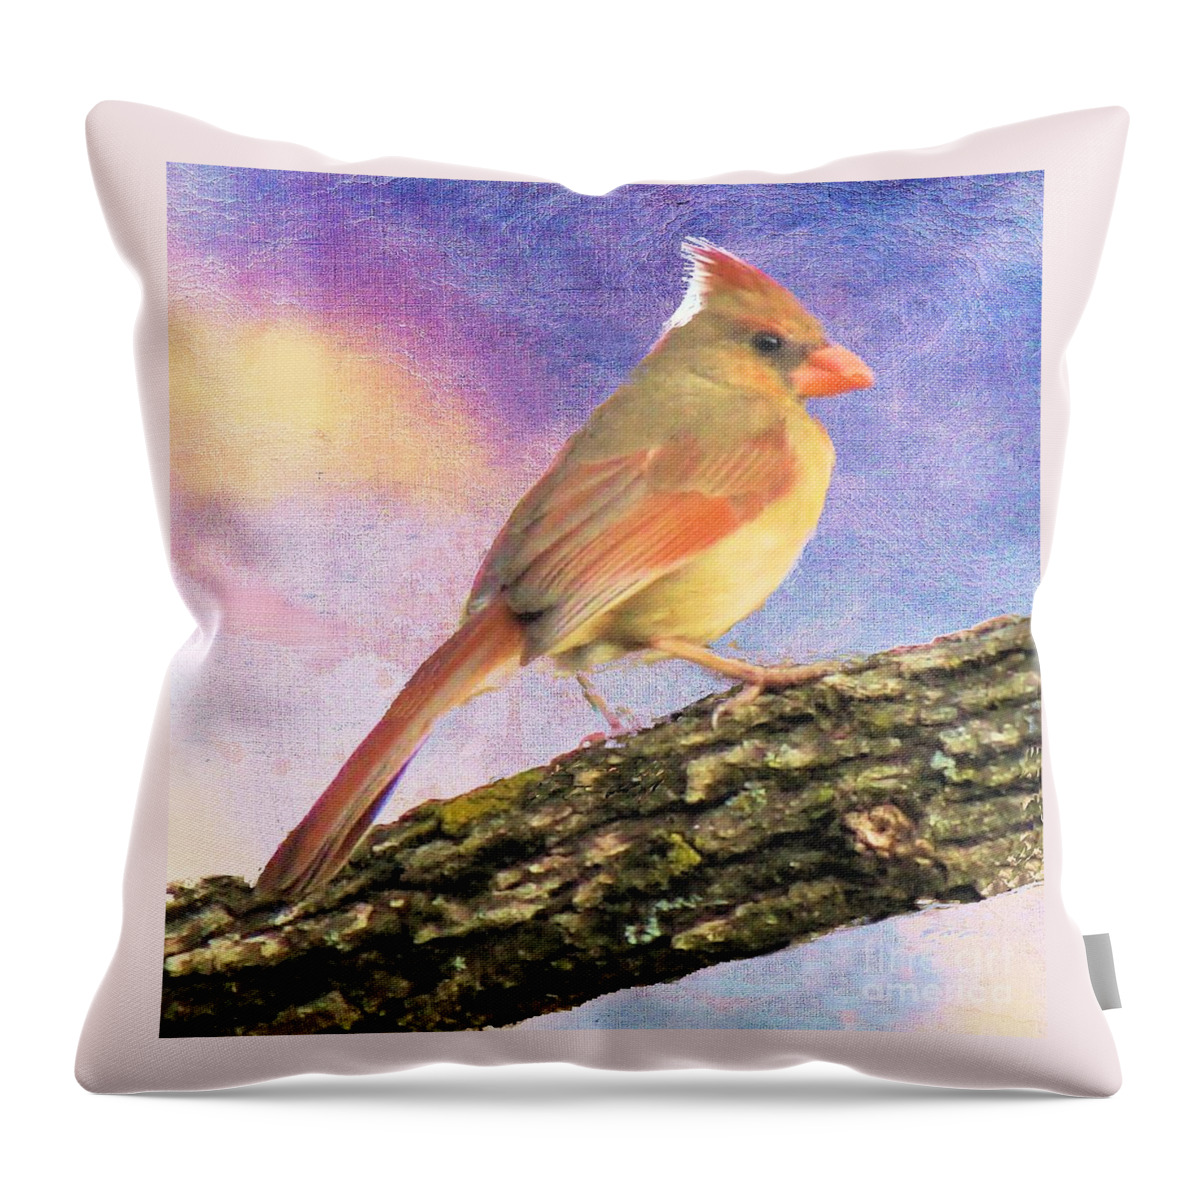 Bird Throw Pillow featuring the photograph Female Cardinal Away From Sun by Janette Boyd